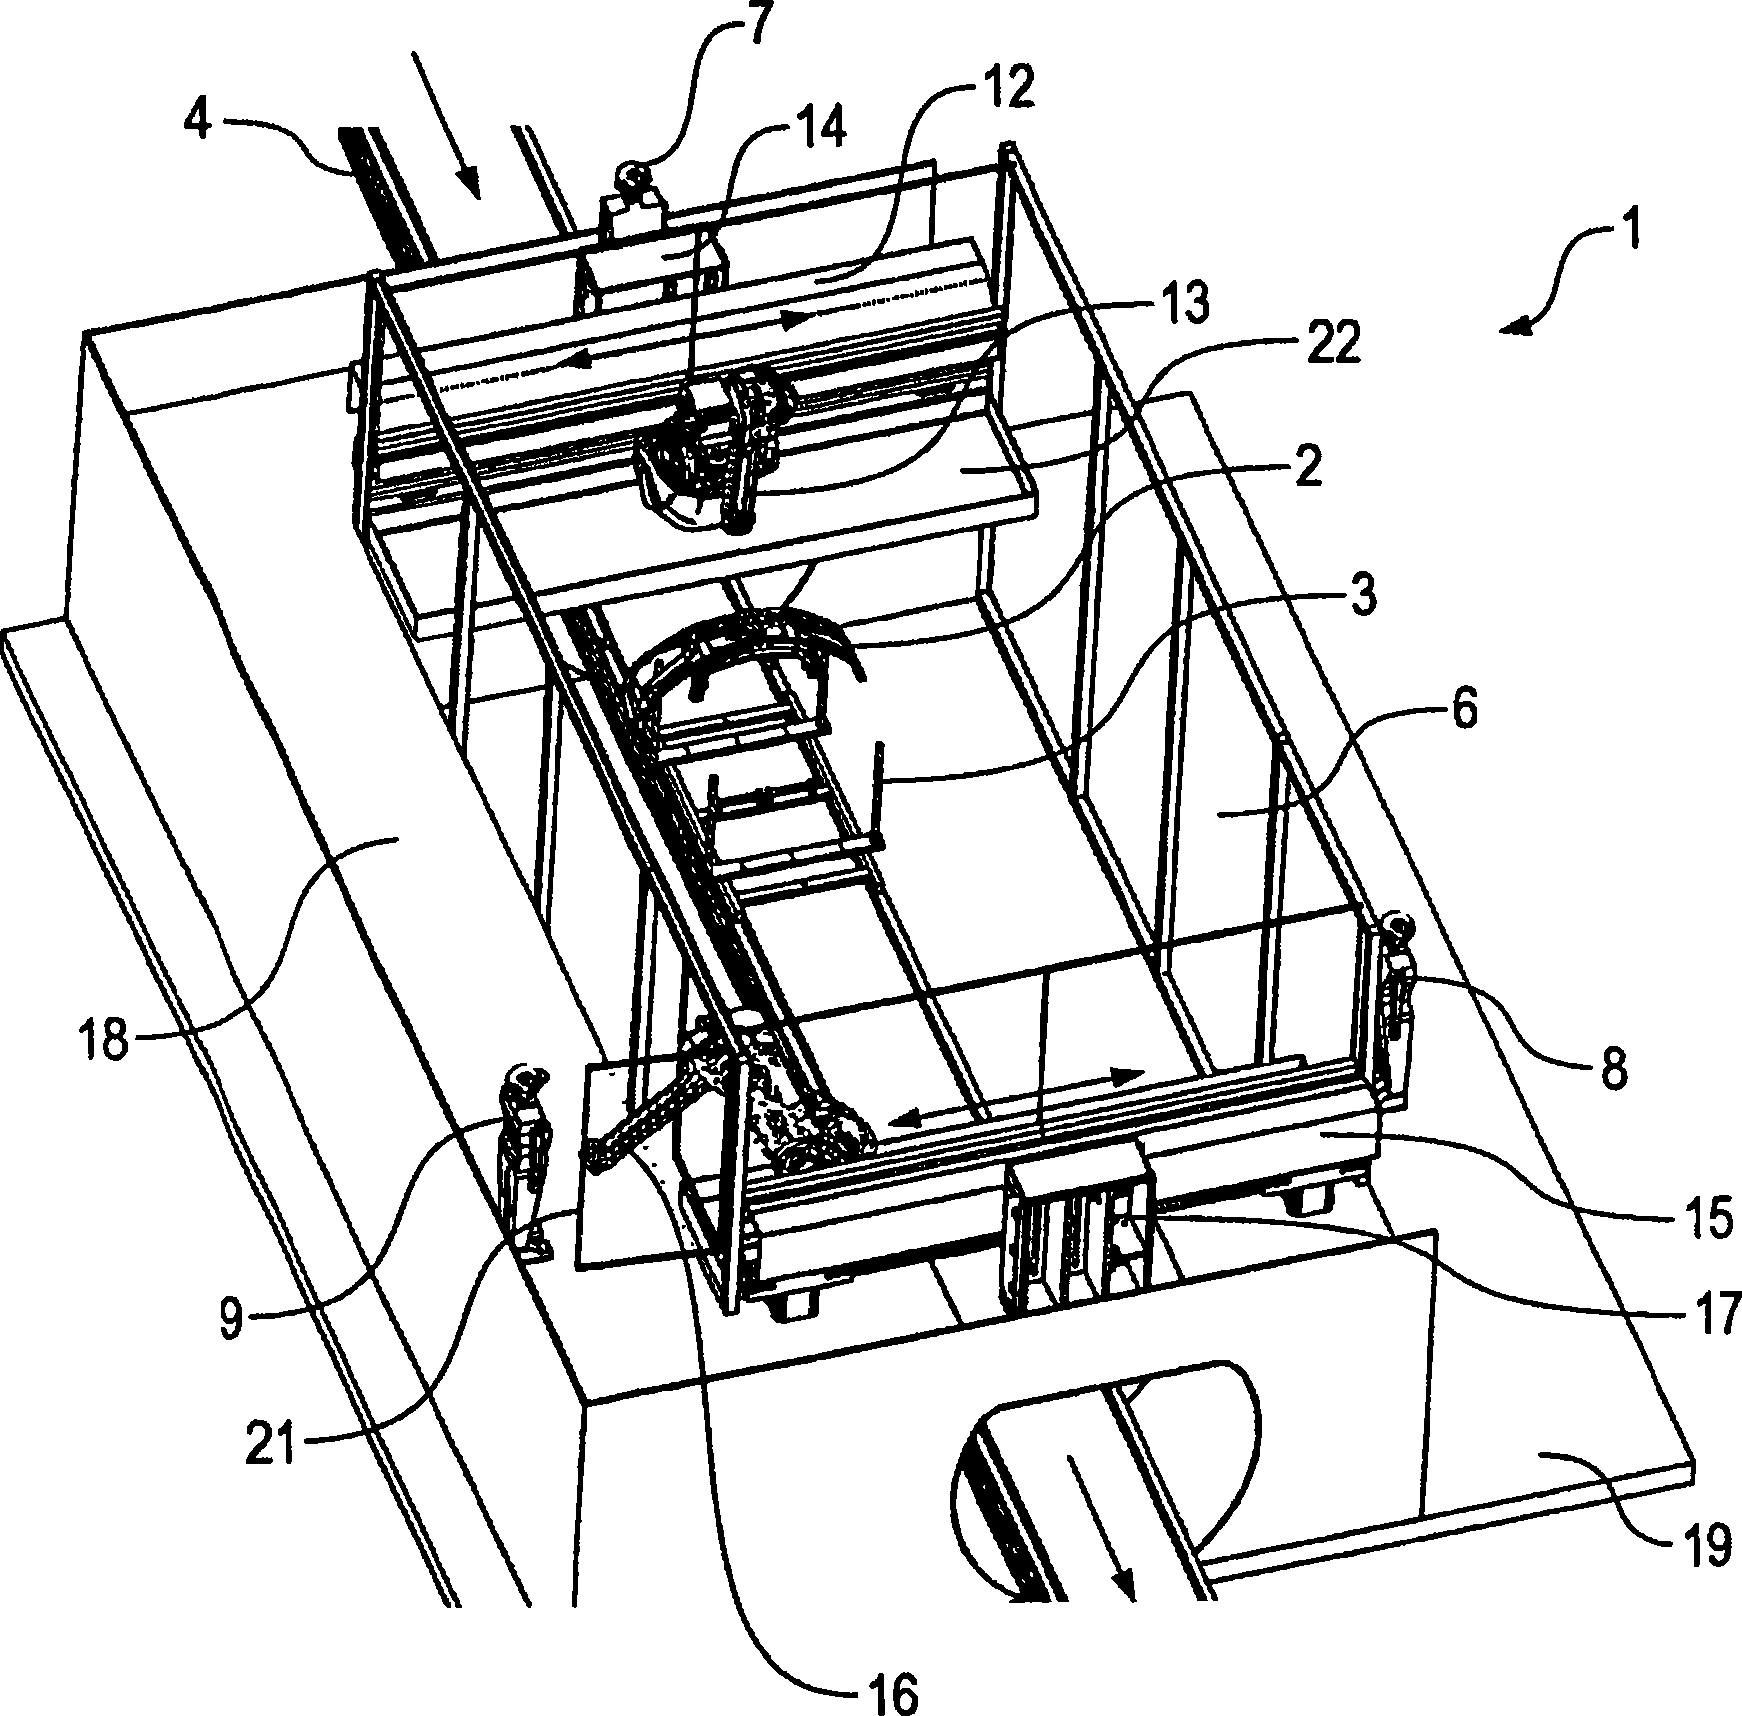 Paint shop and corresponding method of operation